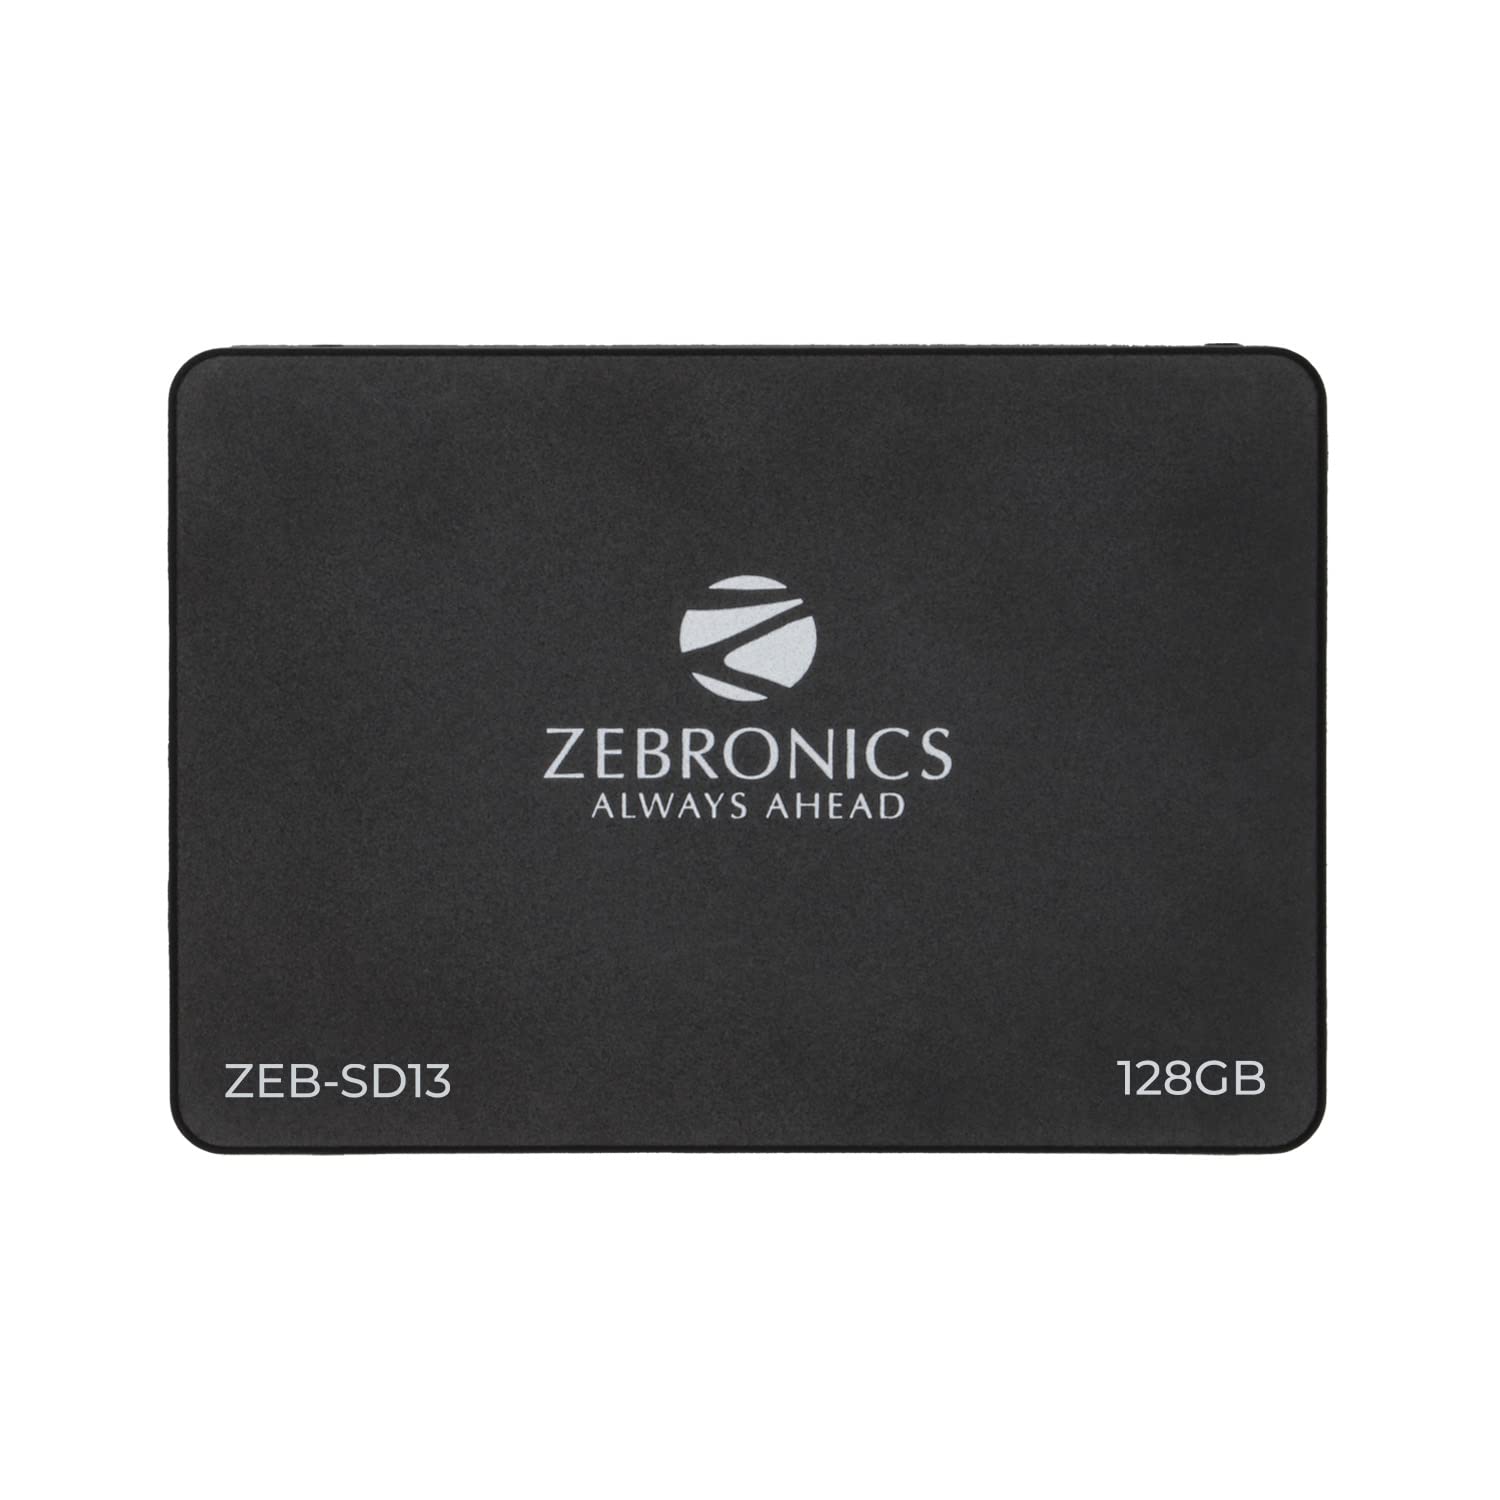 ZEBRONICS Zeb-SD13 128GB SSD, Ultra Low Power Consumption, S.M.A.R.T. Thermal Management and Silent Operation.